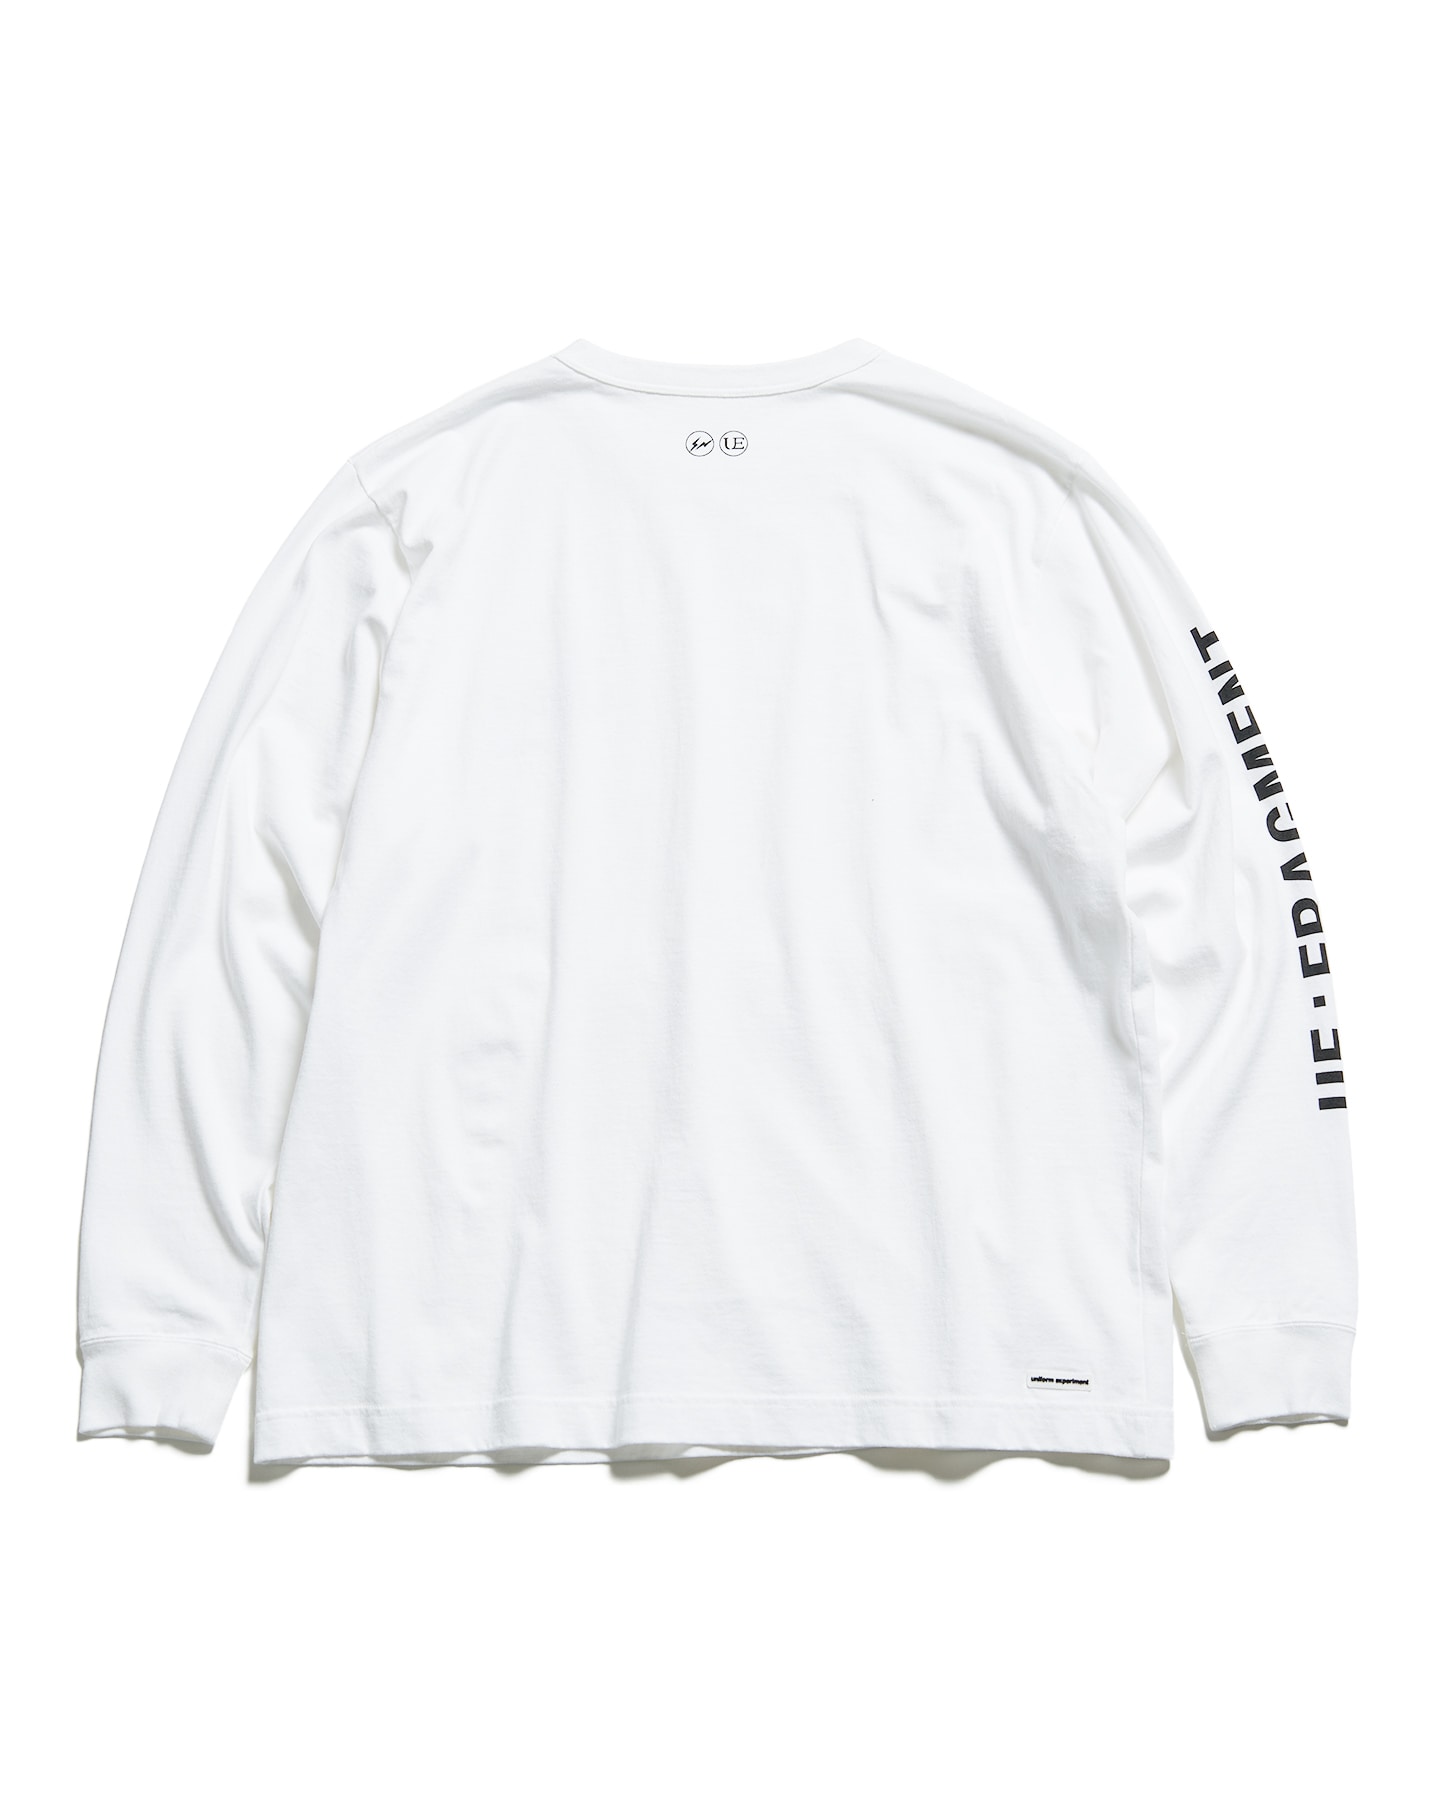 SOPH. | FRAGMENT : JAZZY JAY / JAZZY 5 L/S TEE(2 WHITE):